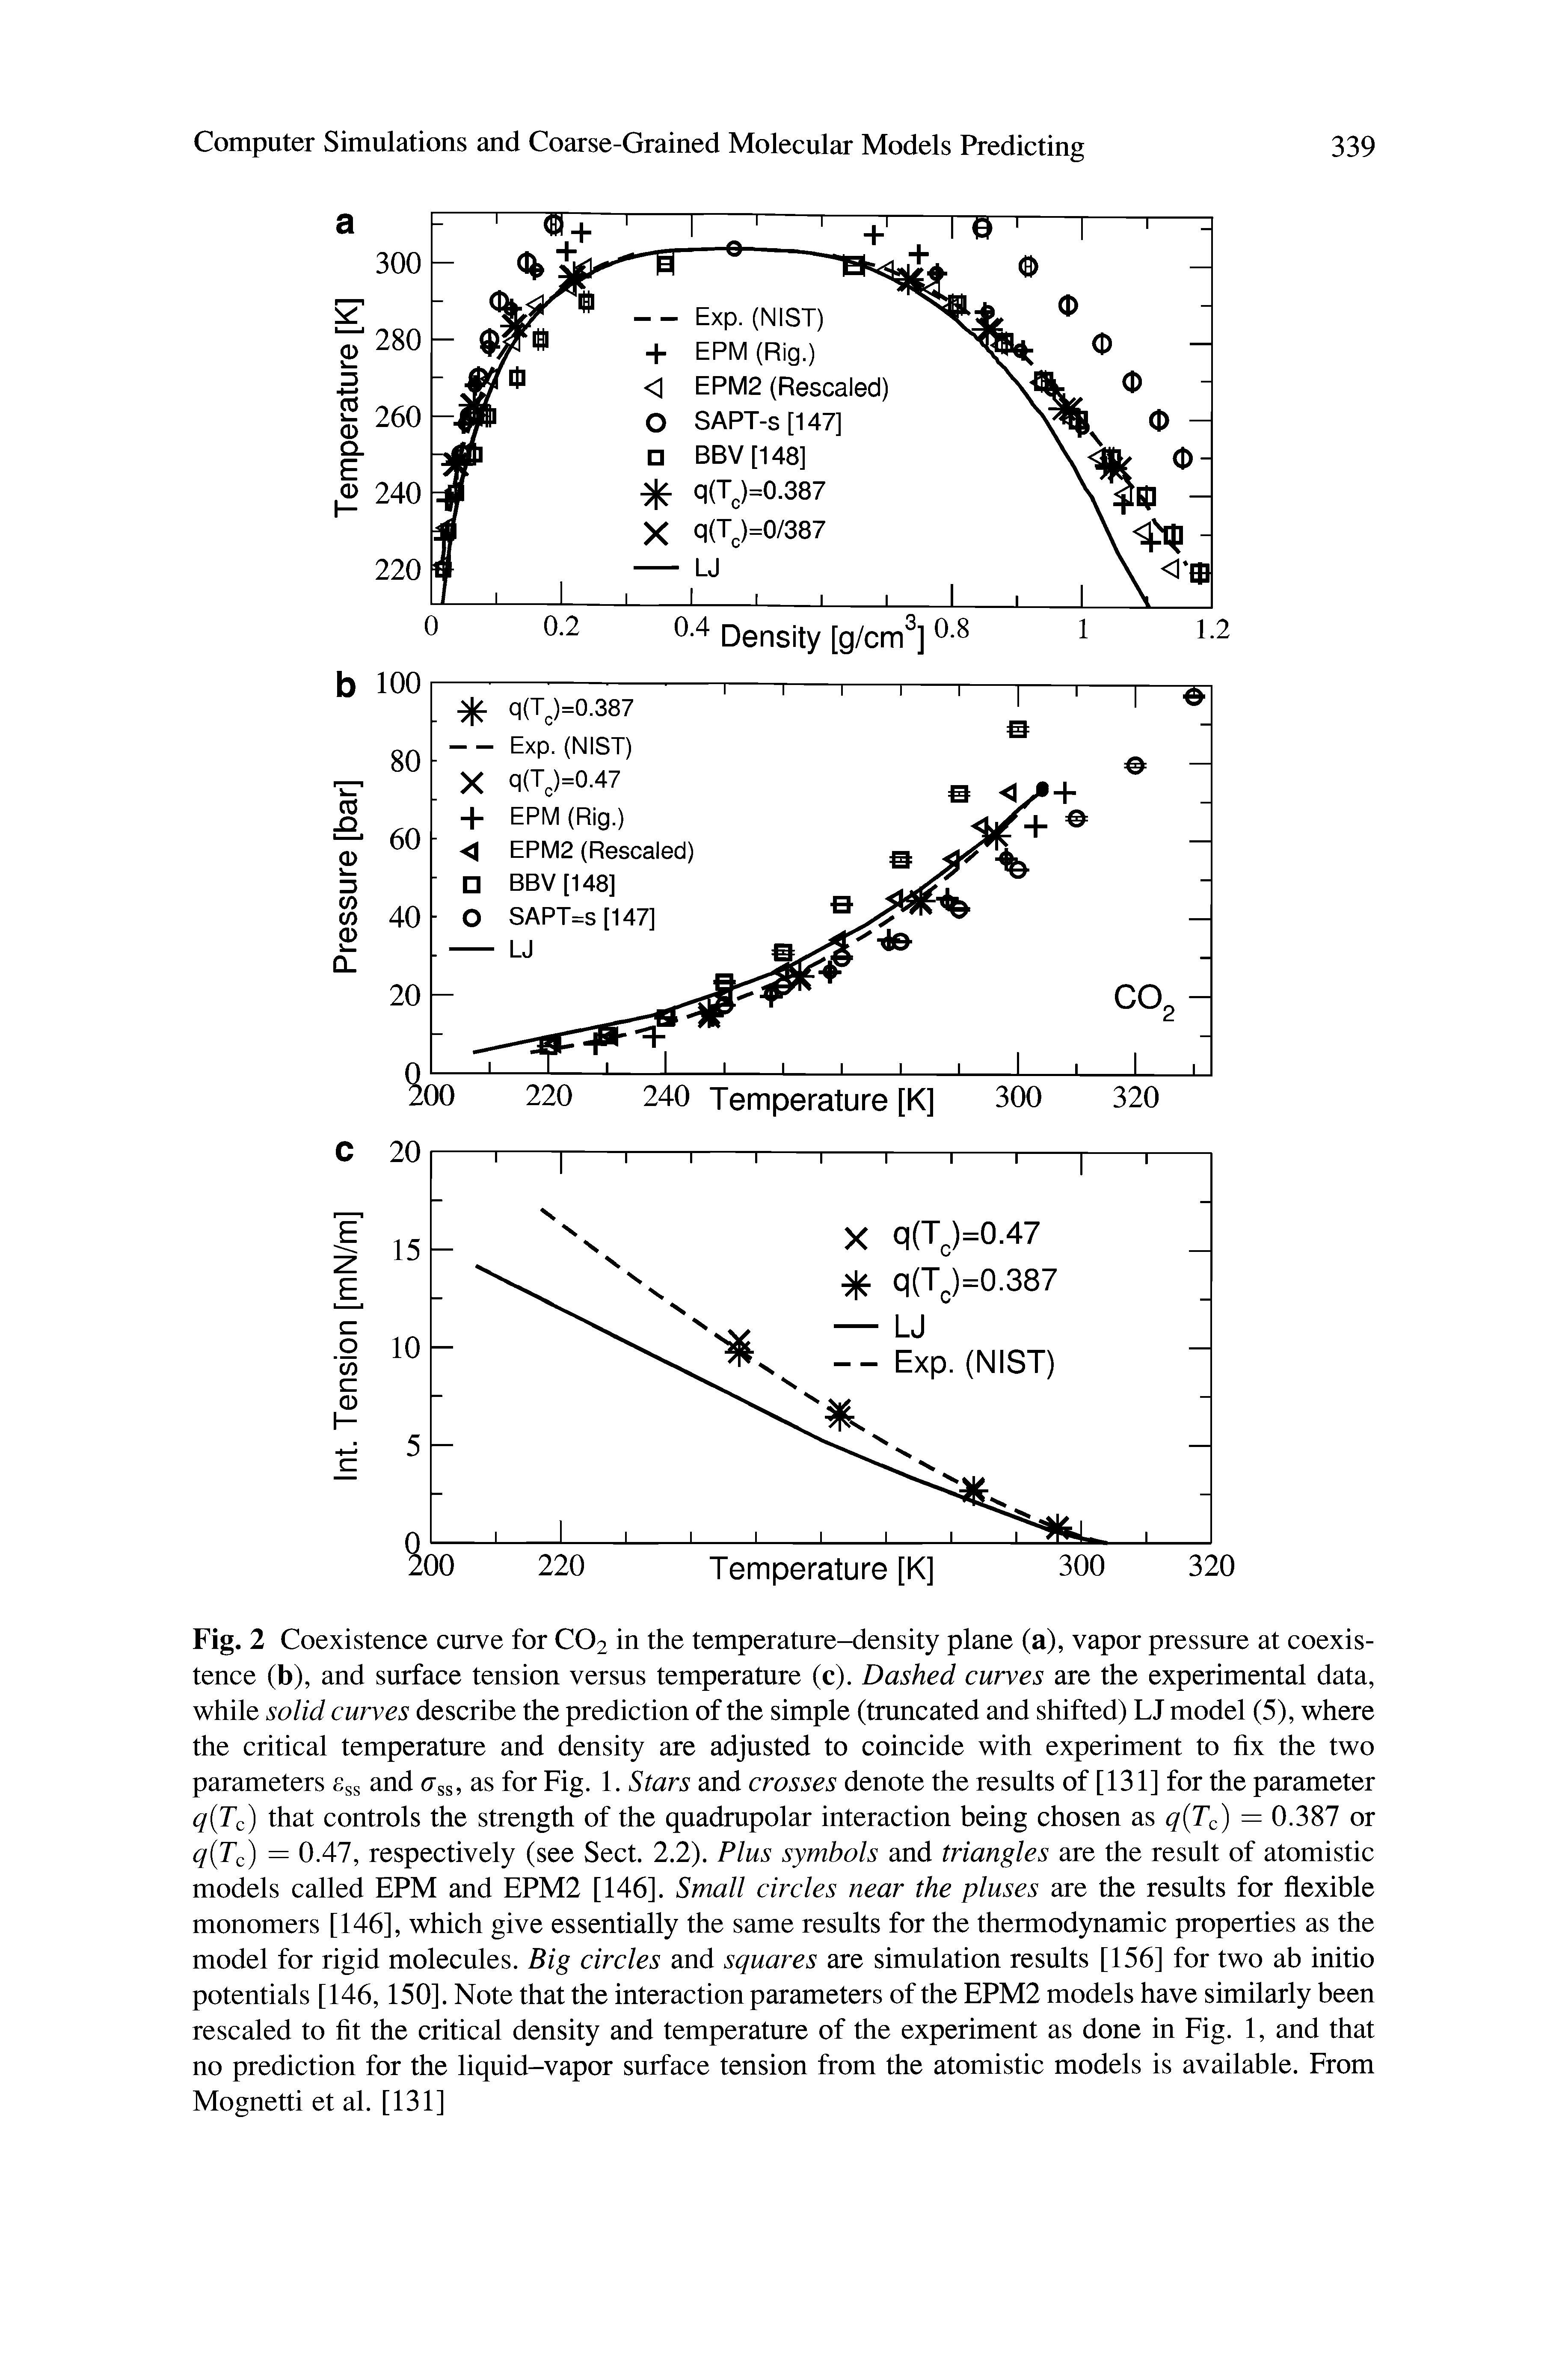 Fig. 2 Coexistence curve for CO2 in the temperature-density plane (a), vapor pressure at coexistence (b), and surface tension versus temperature (c). Dashed curves are the experimental data, while solid curves describe the prediction of the simple (truncated and shifted) LJ model (5), where the critical temperature and density are adjusted to coincide with experiment to fix the two parameters Sgs and as for Fig. 1. Stars and crosses denote the results of [131] for the parameter q Tc) that controls the strength of the quadrupolar interaction being chosen as q Tc) = 0.387 or q(Tc) = 0.47, respectively (see Sect. 2.2). Plus symbols and triangles are the result of atomistic models called EPM and EPM2 [146]. Small circles near the pluses are the results for flexible monomers [146], which give essentially the same results for the thermodynamic properties as the model for rigid molecules. Big circles and squares are simulation results [156] for two ab initio potentials [146,150]. Note that the interaction parameters of the EPM2 models have similarly been rescaled to fit the critical density and temperature of the experiment as done in Fig. 1, and that no prediction for the liquid-vapor surface tension from the atomistic models is available. From Mognetti et al. [131]...